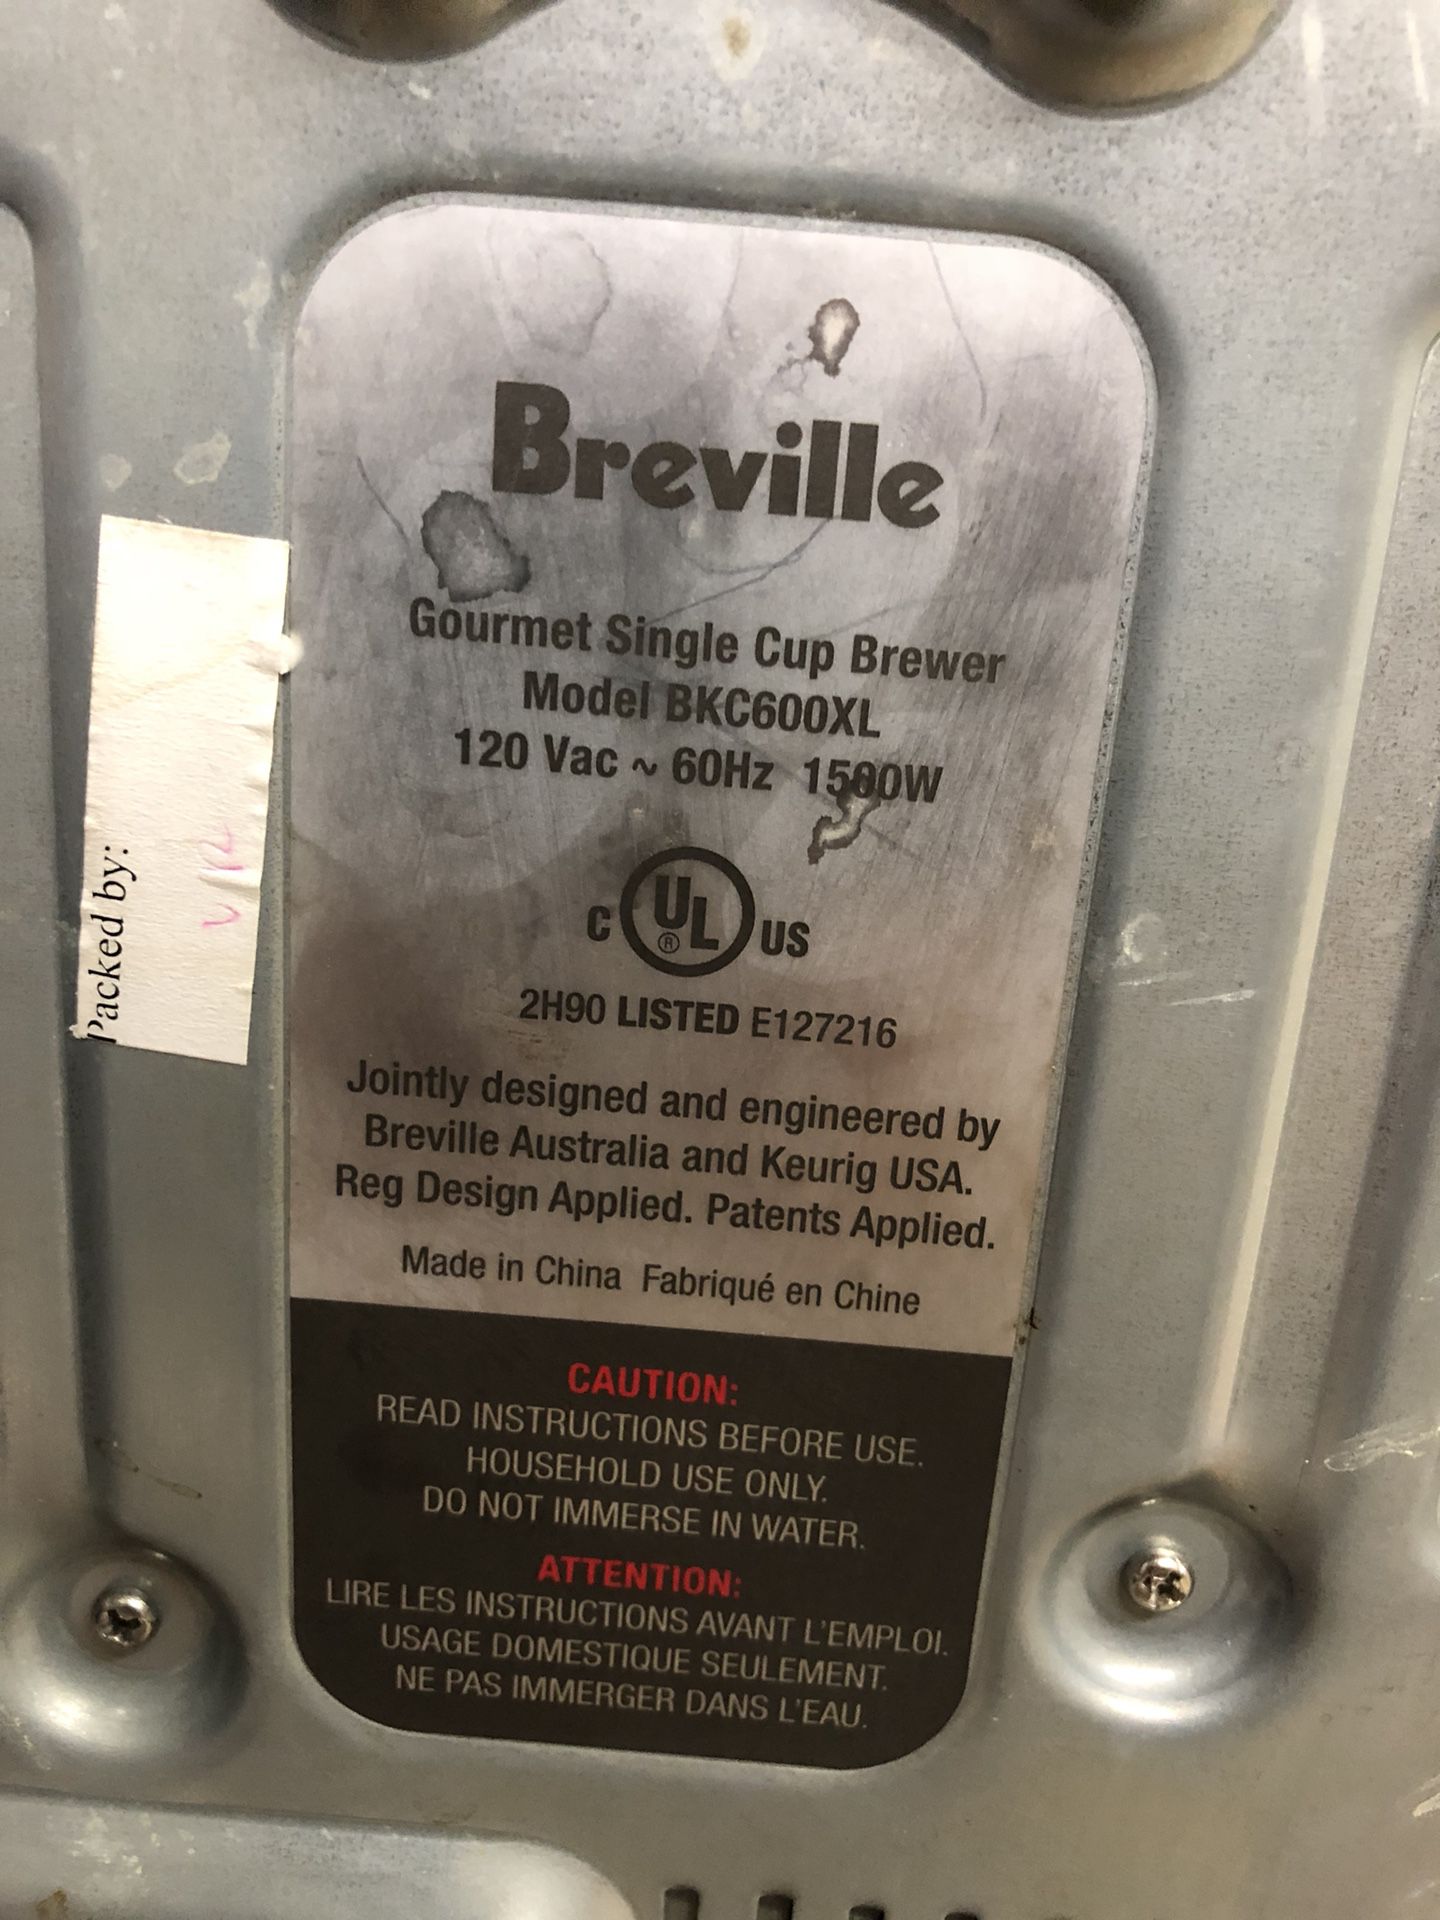 Out of the Box: Breville Gourmet Single Cup Brewer BKC700XL 